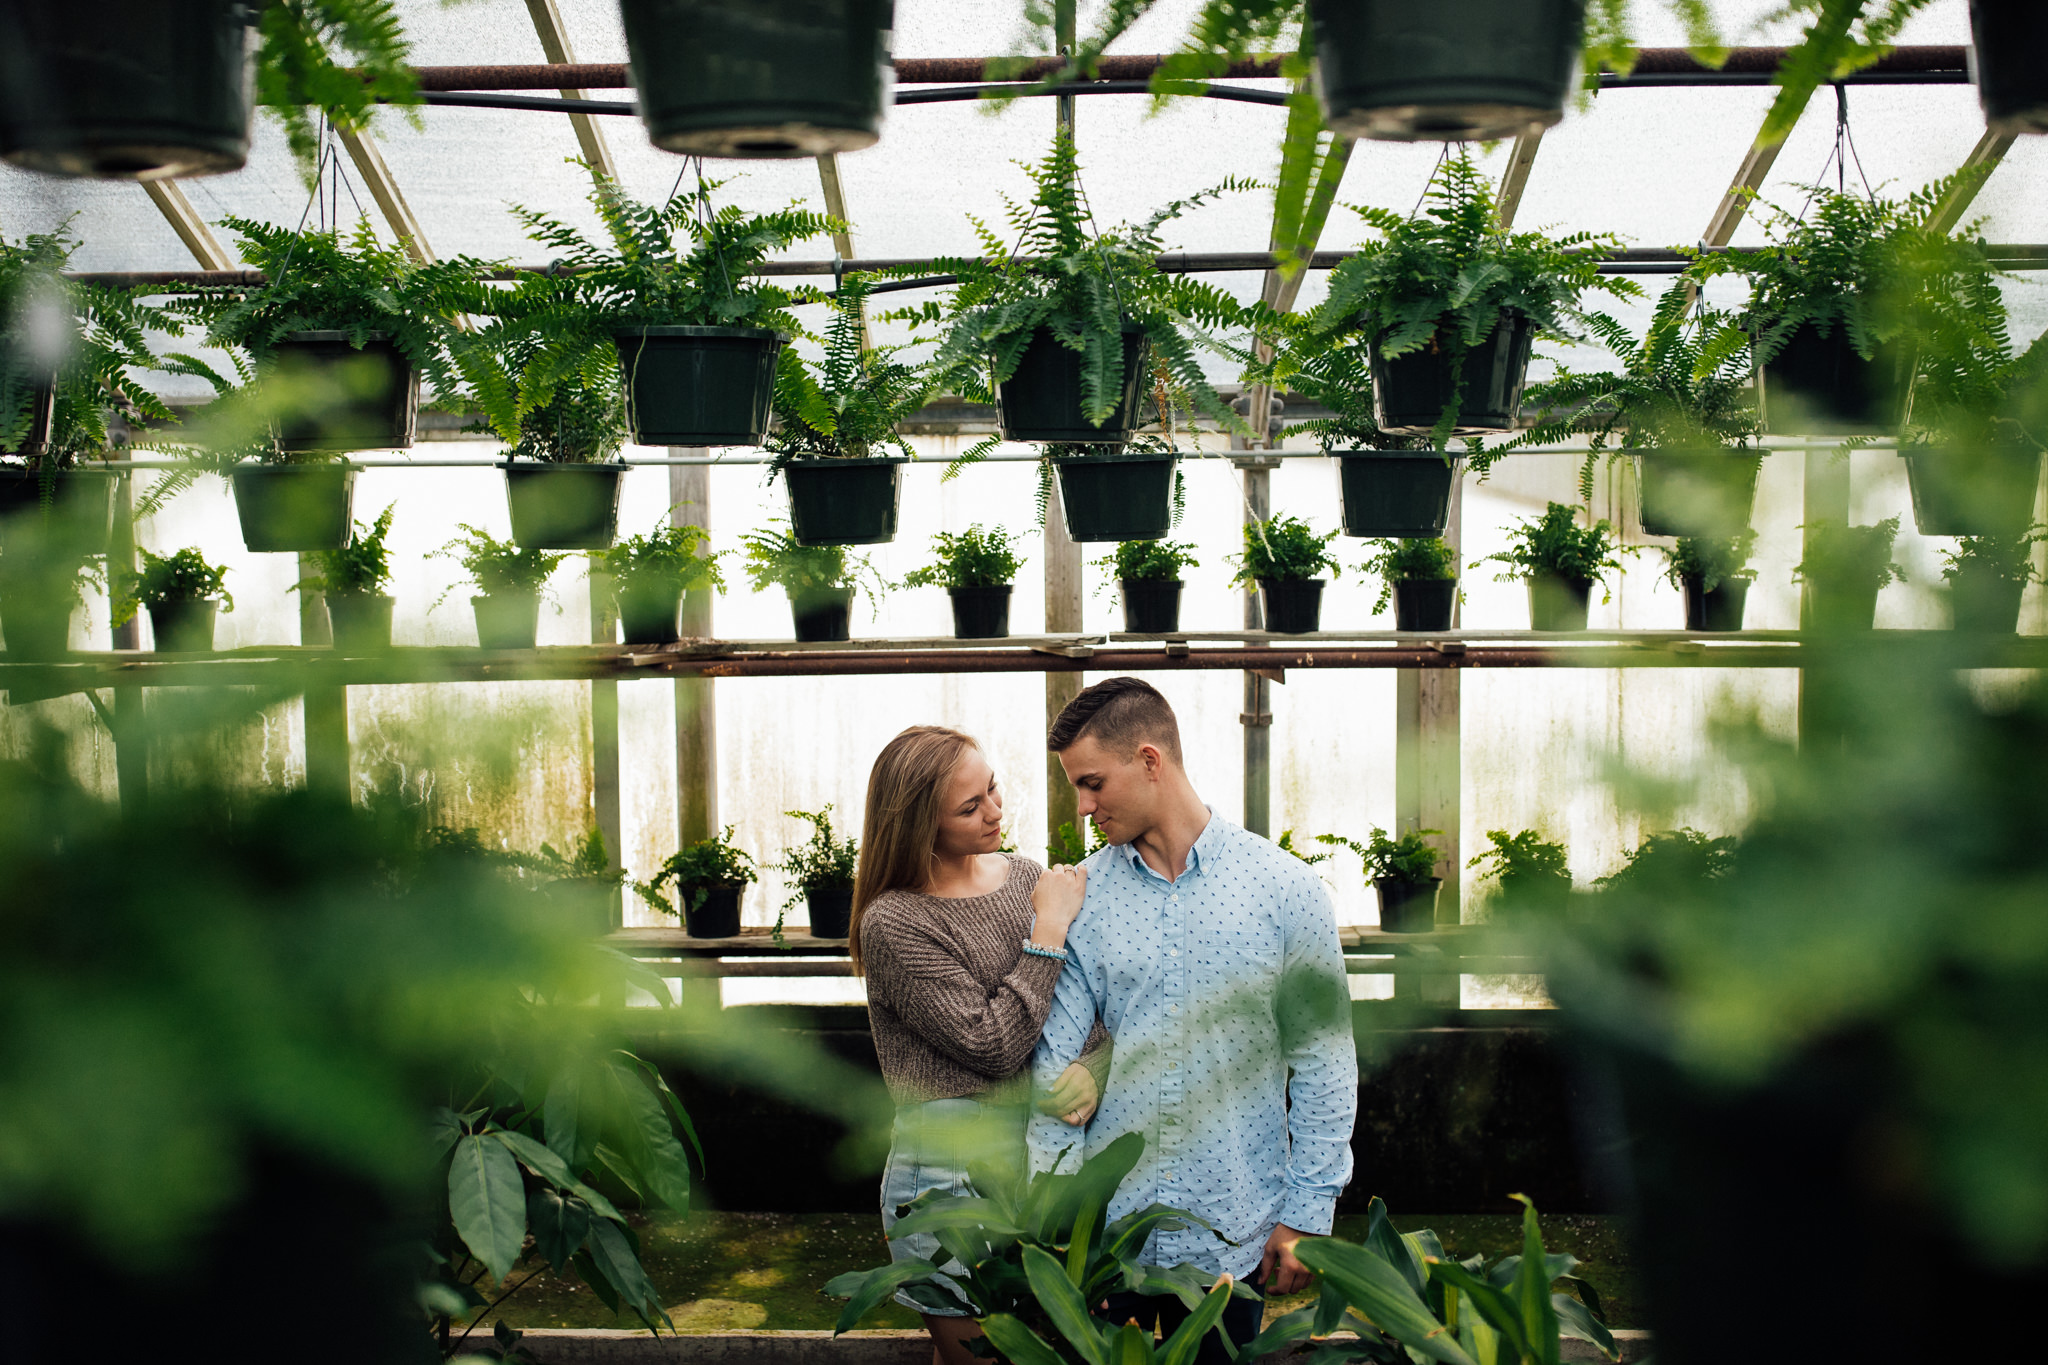 memphis-engagement-photographer-thewarmtharoundyou-greenhouse-engagement-pictures (23 of 118).jpg